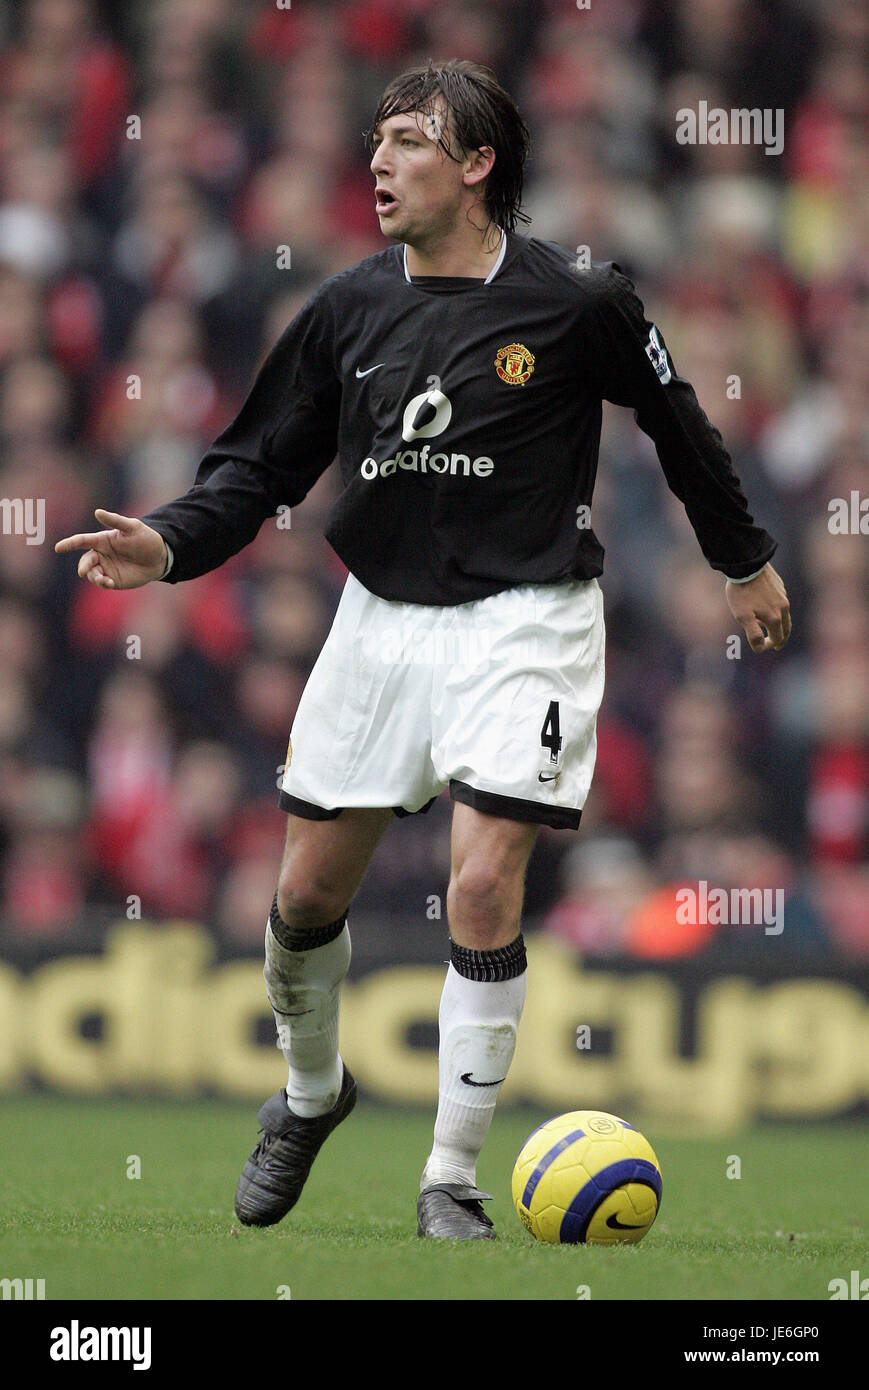 GABRIEL HEINZE MANCHESTER UNITED FC ANFIELD LIVERPOOL ENGLAND 15 January 2005 Stock Photo